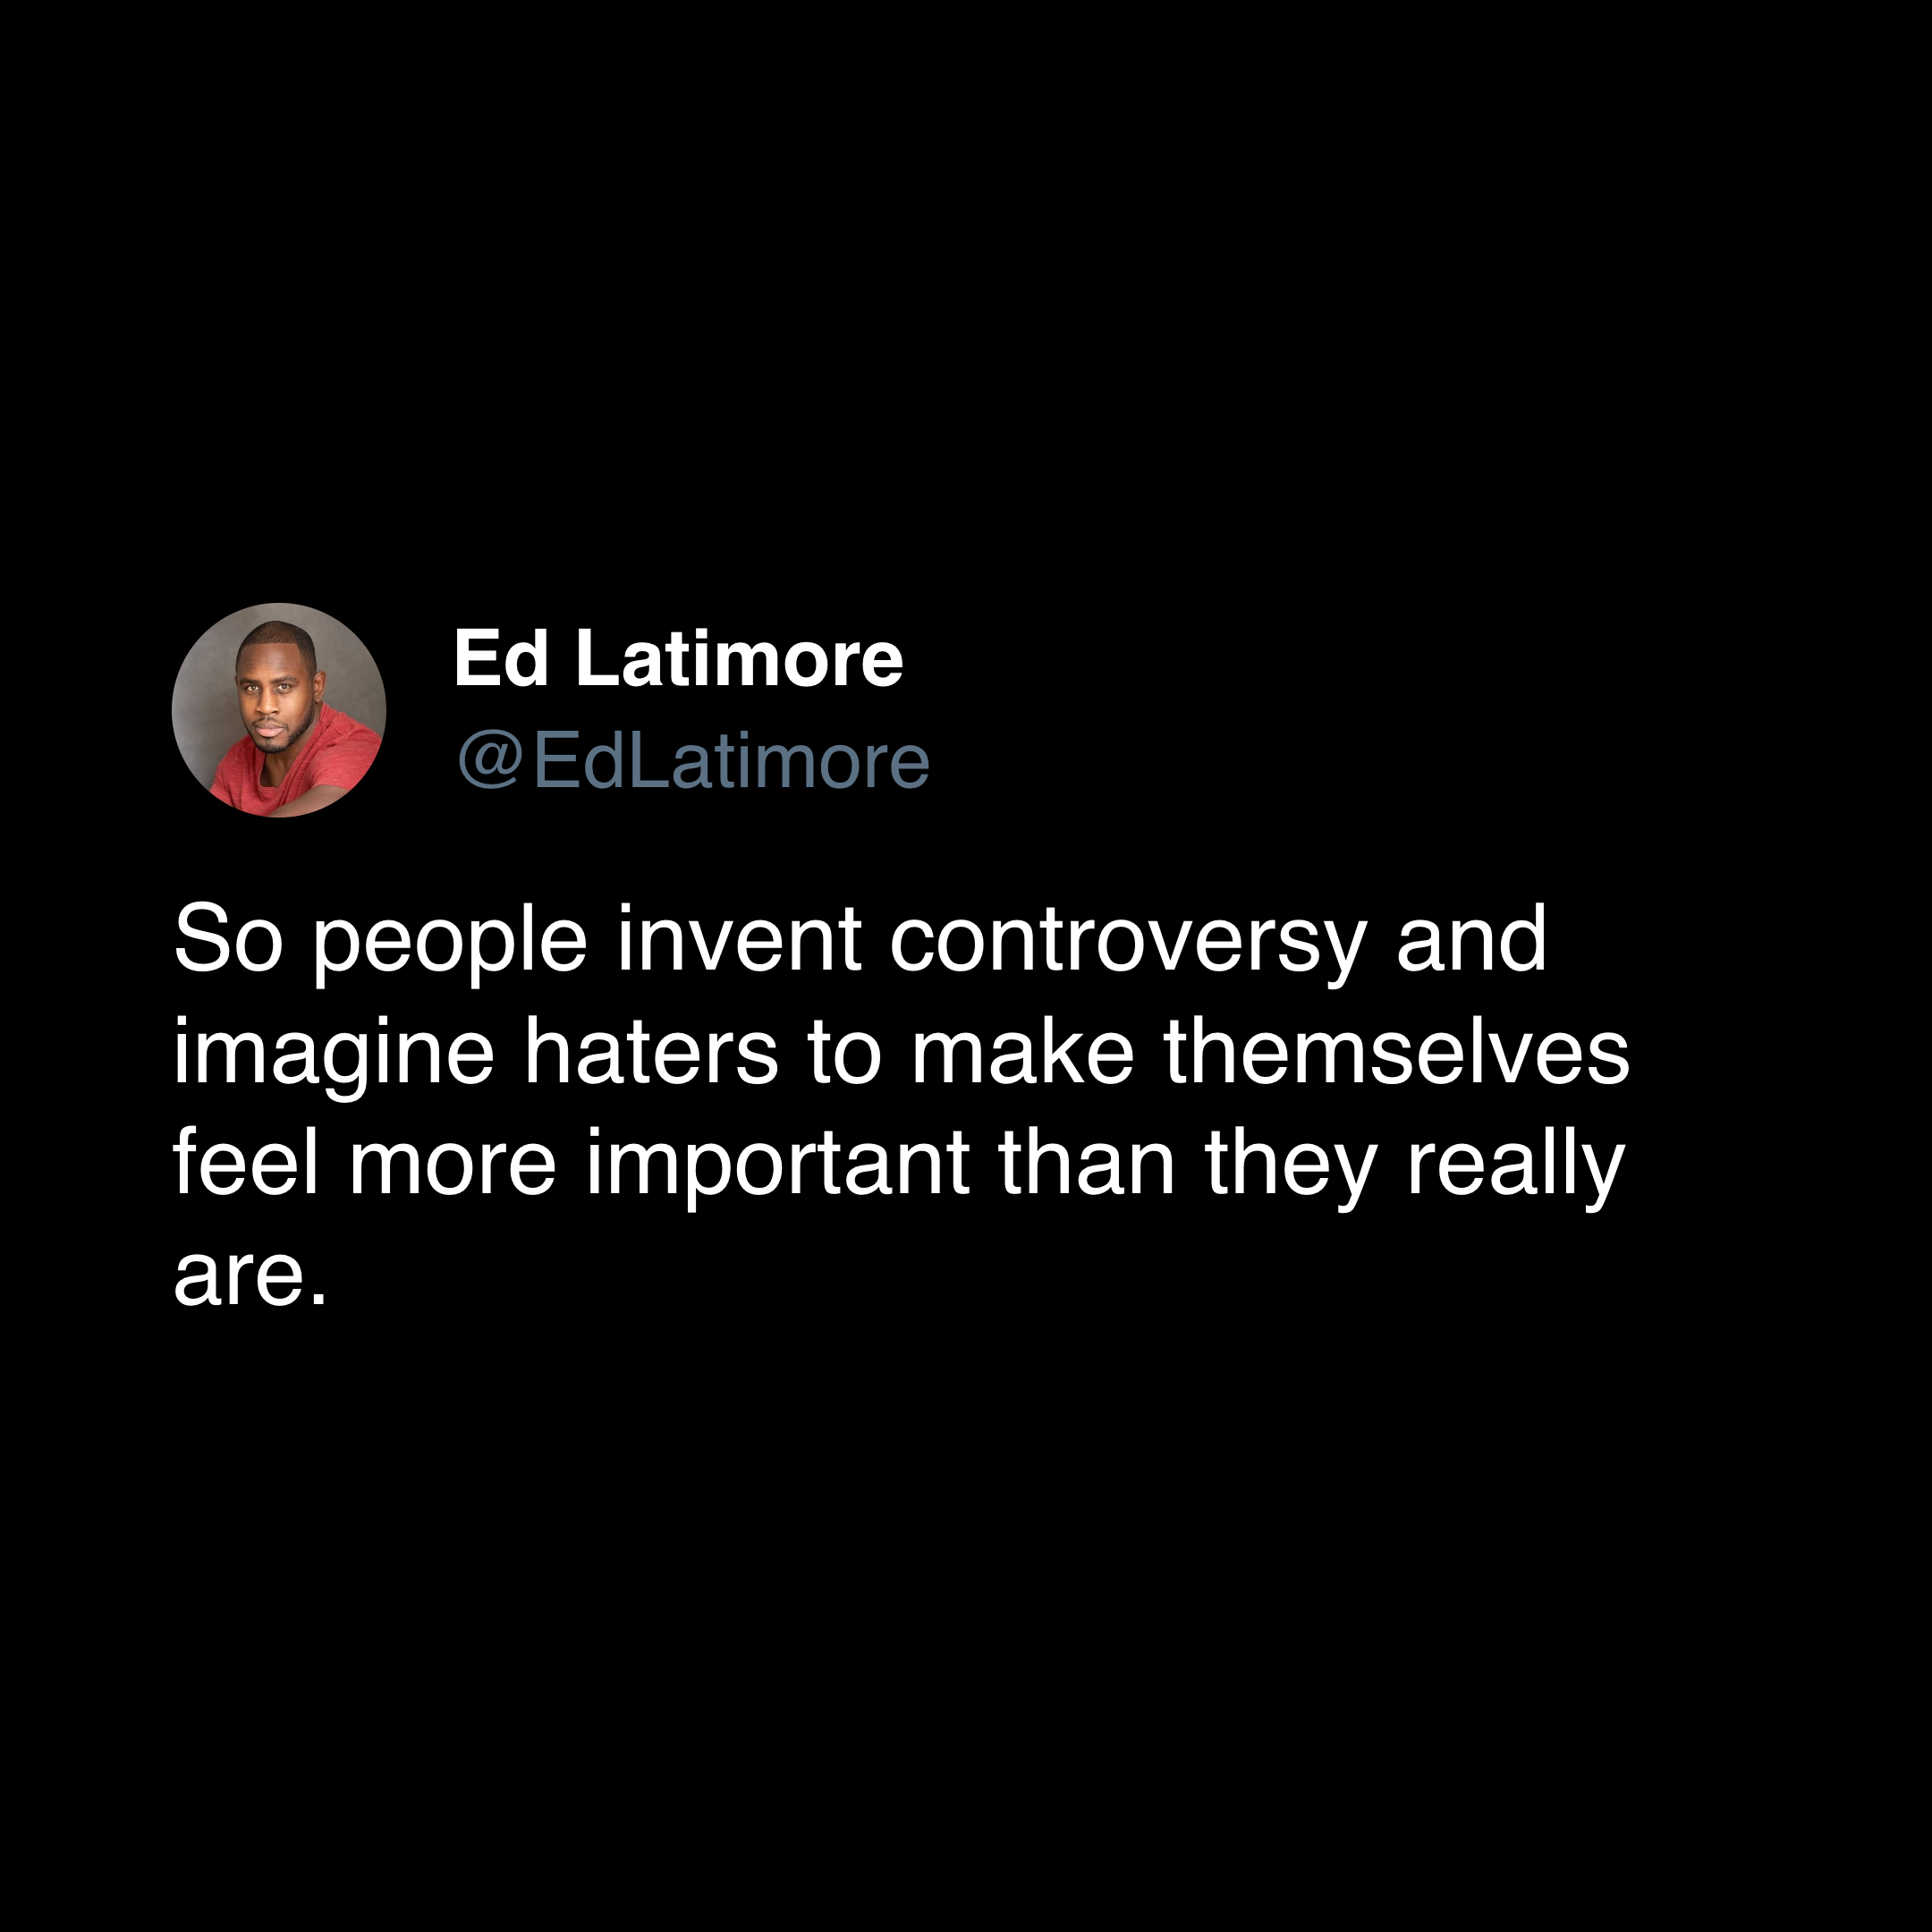 hater quotes "inventing controversy"